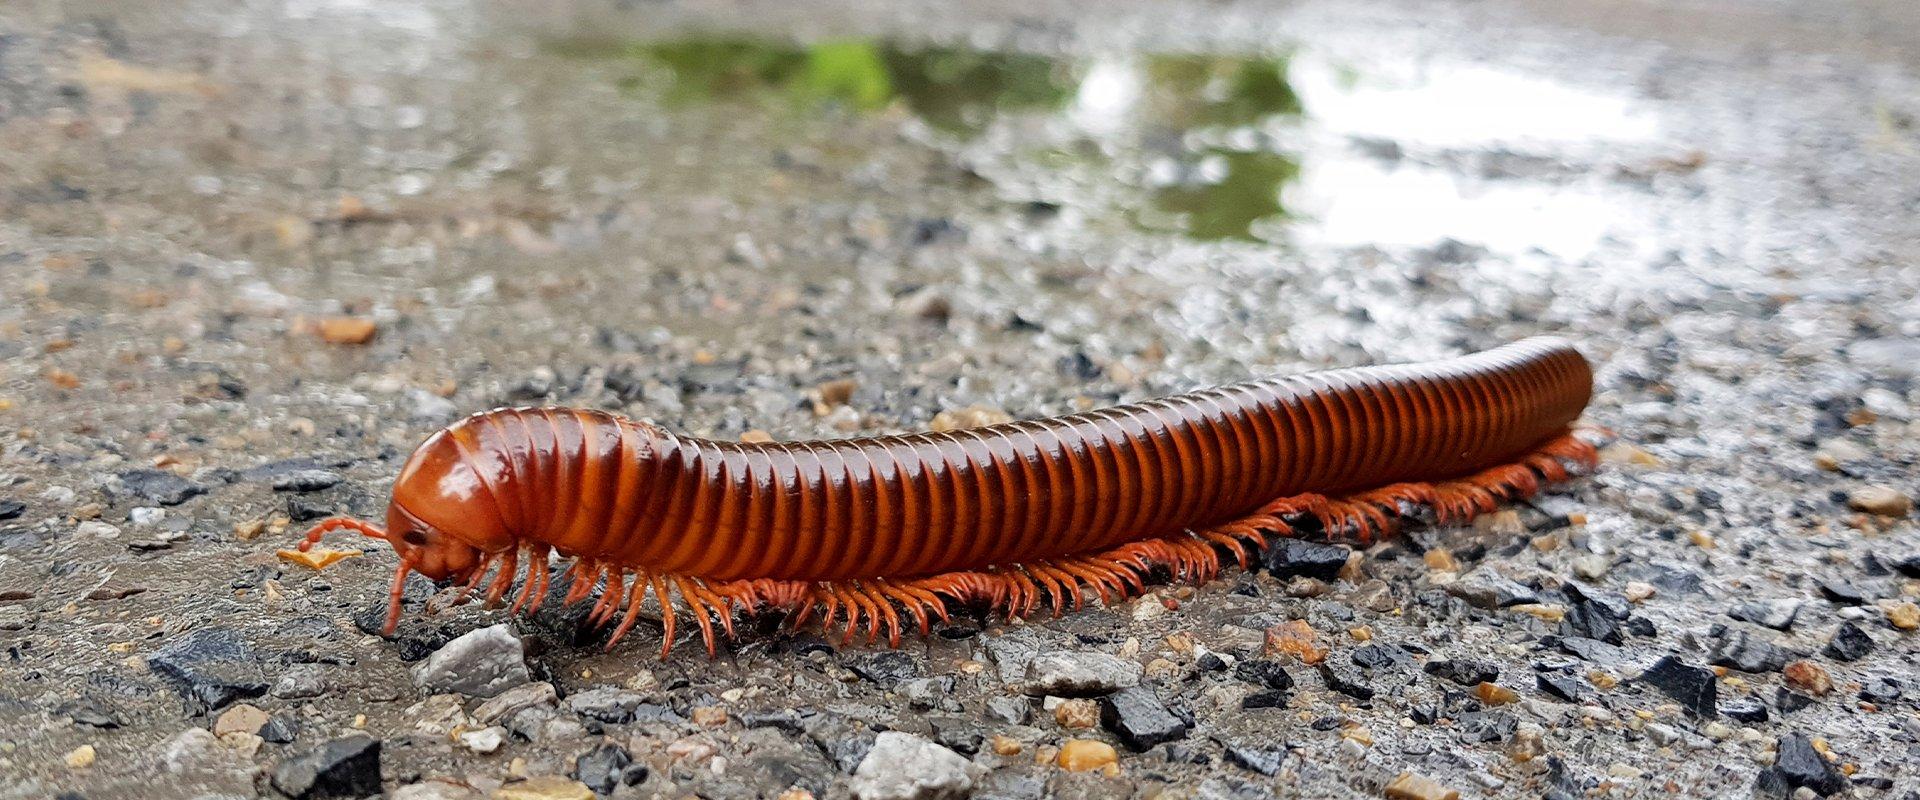 millipede on ground outside